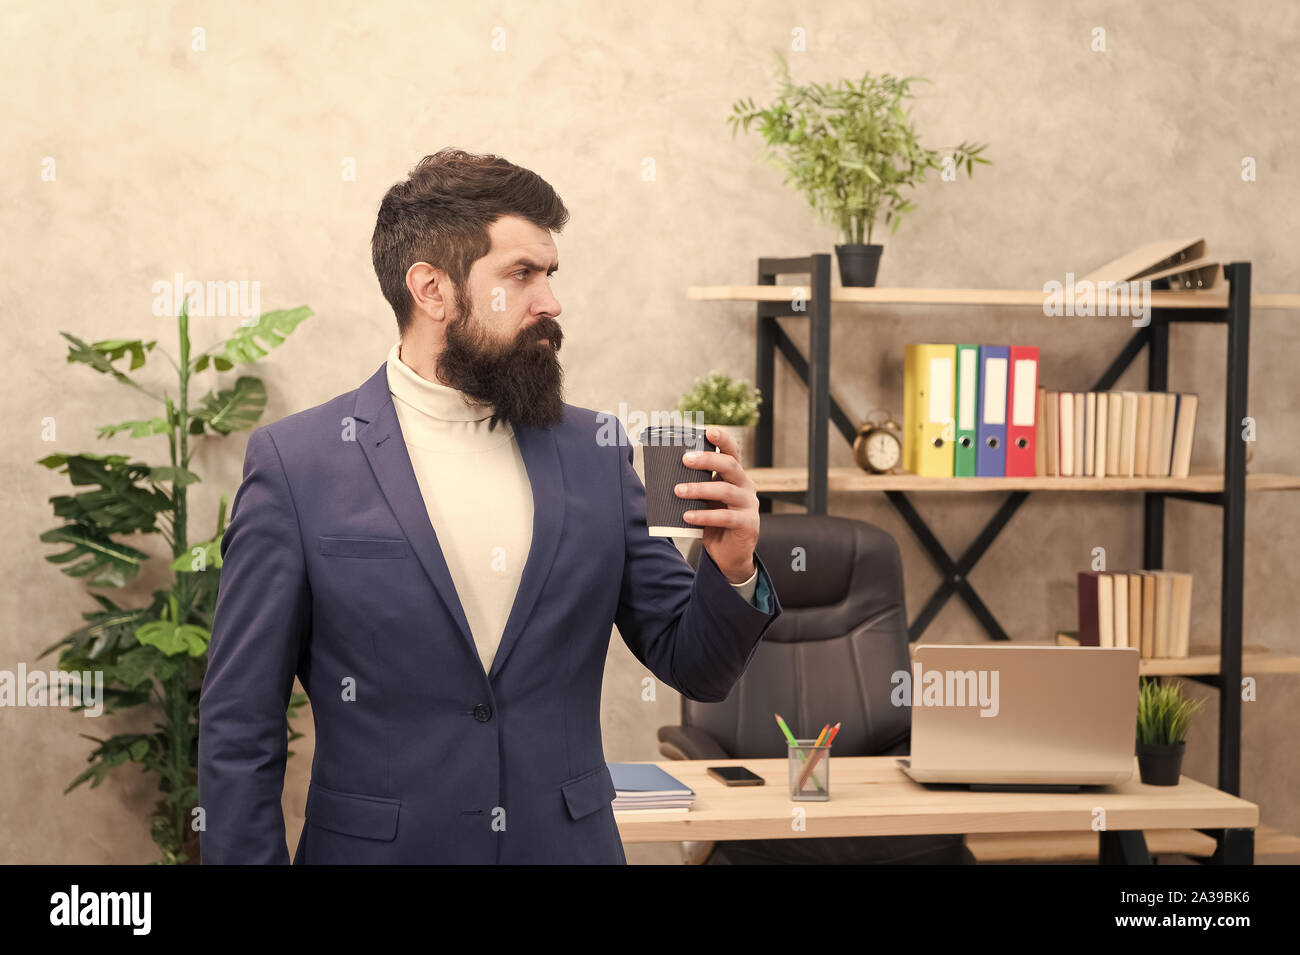 full concentration. Businessman in formal outfit. concentration at work. Confident man concentrated at work. Boss workplace. Coffee break. Bearded man in business office. total concentration. Energy. Stock Photo